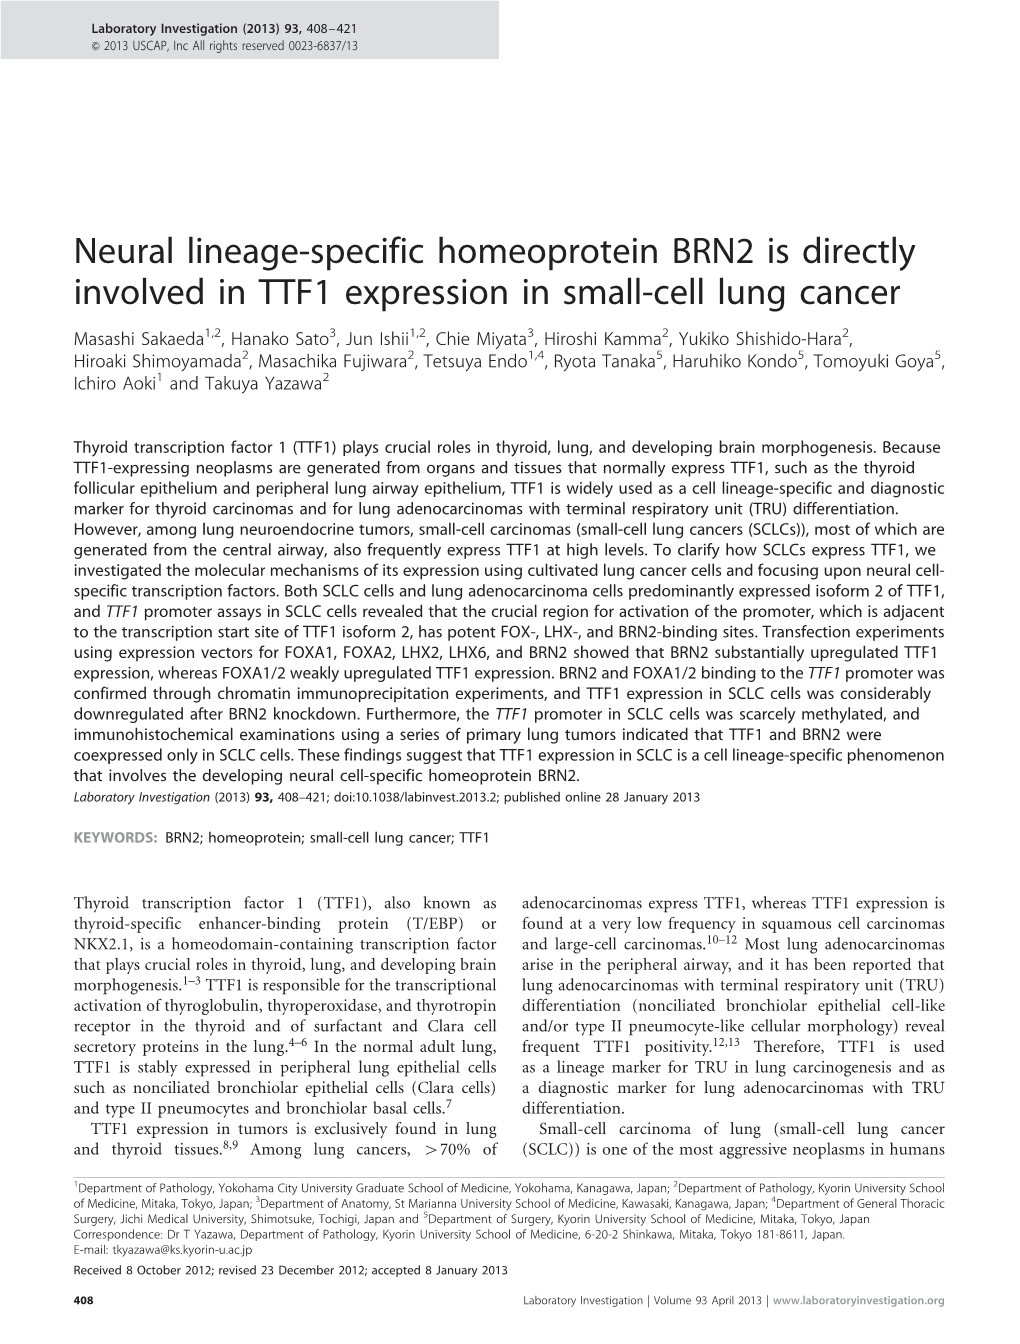 Neural Lineage-Specific Homeoprotein BRN2 Is Directly Involved in TTF1